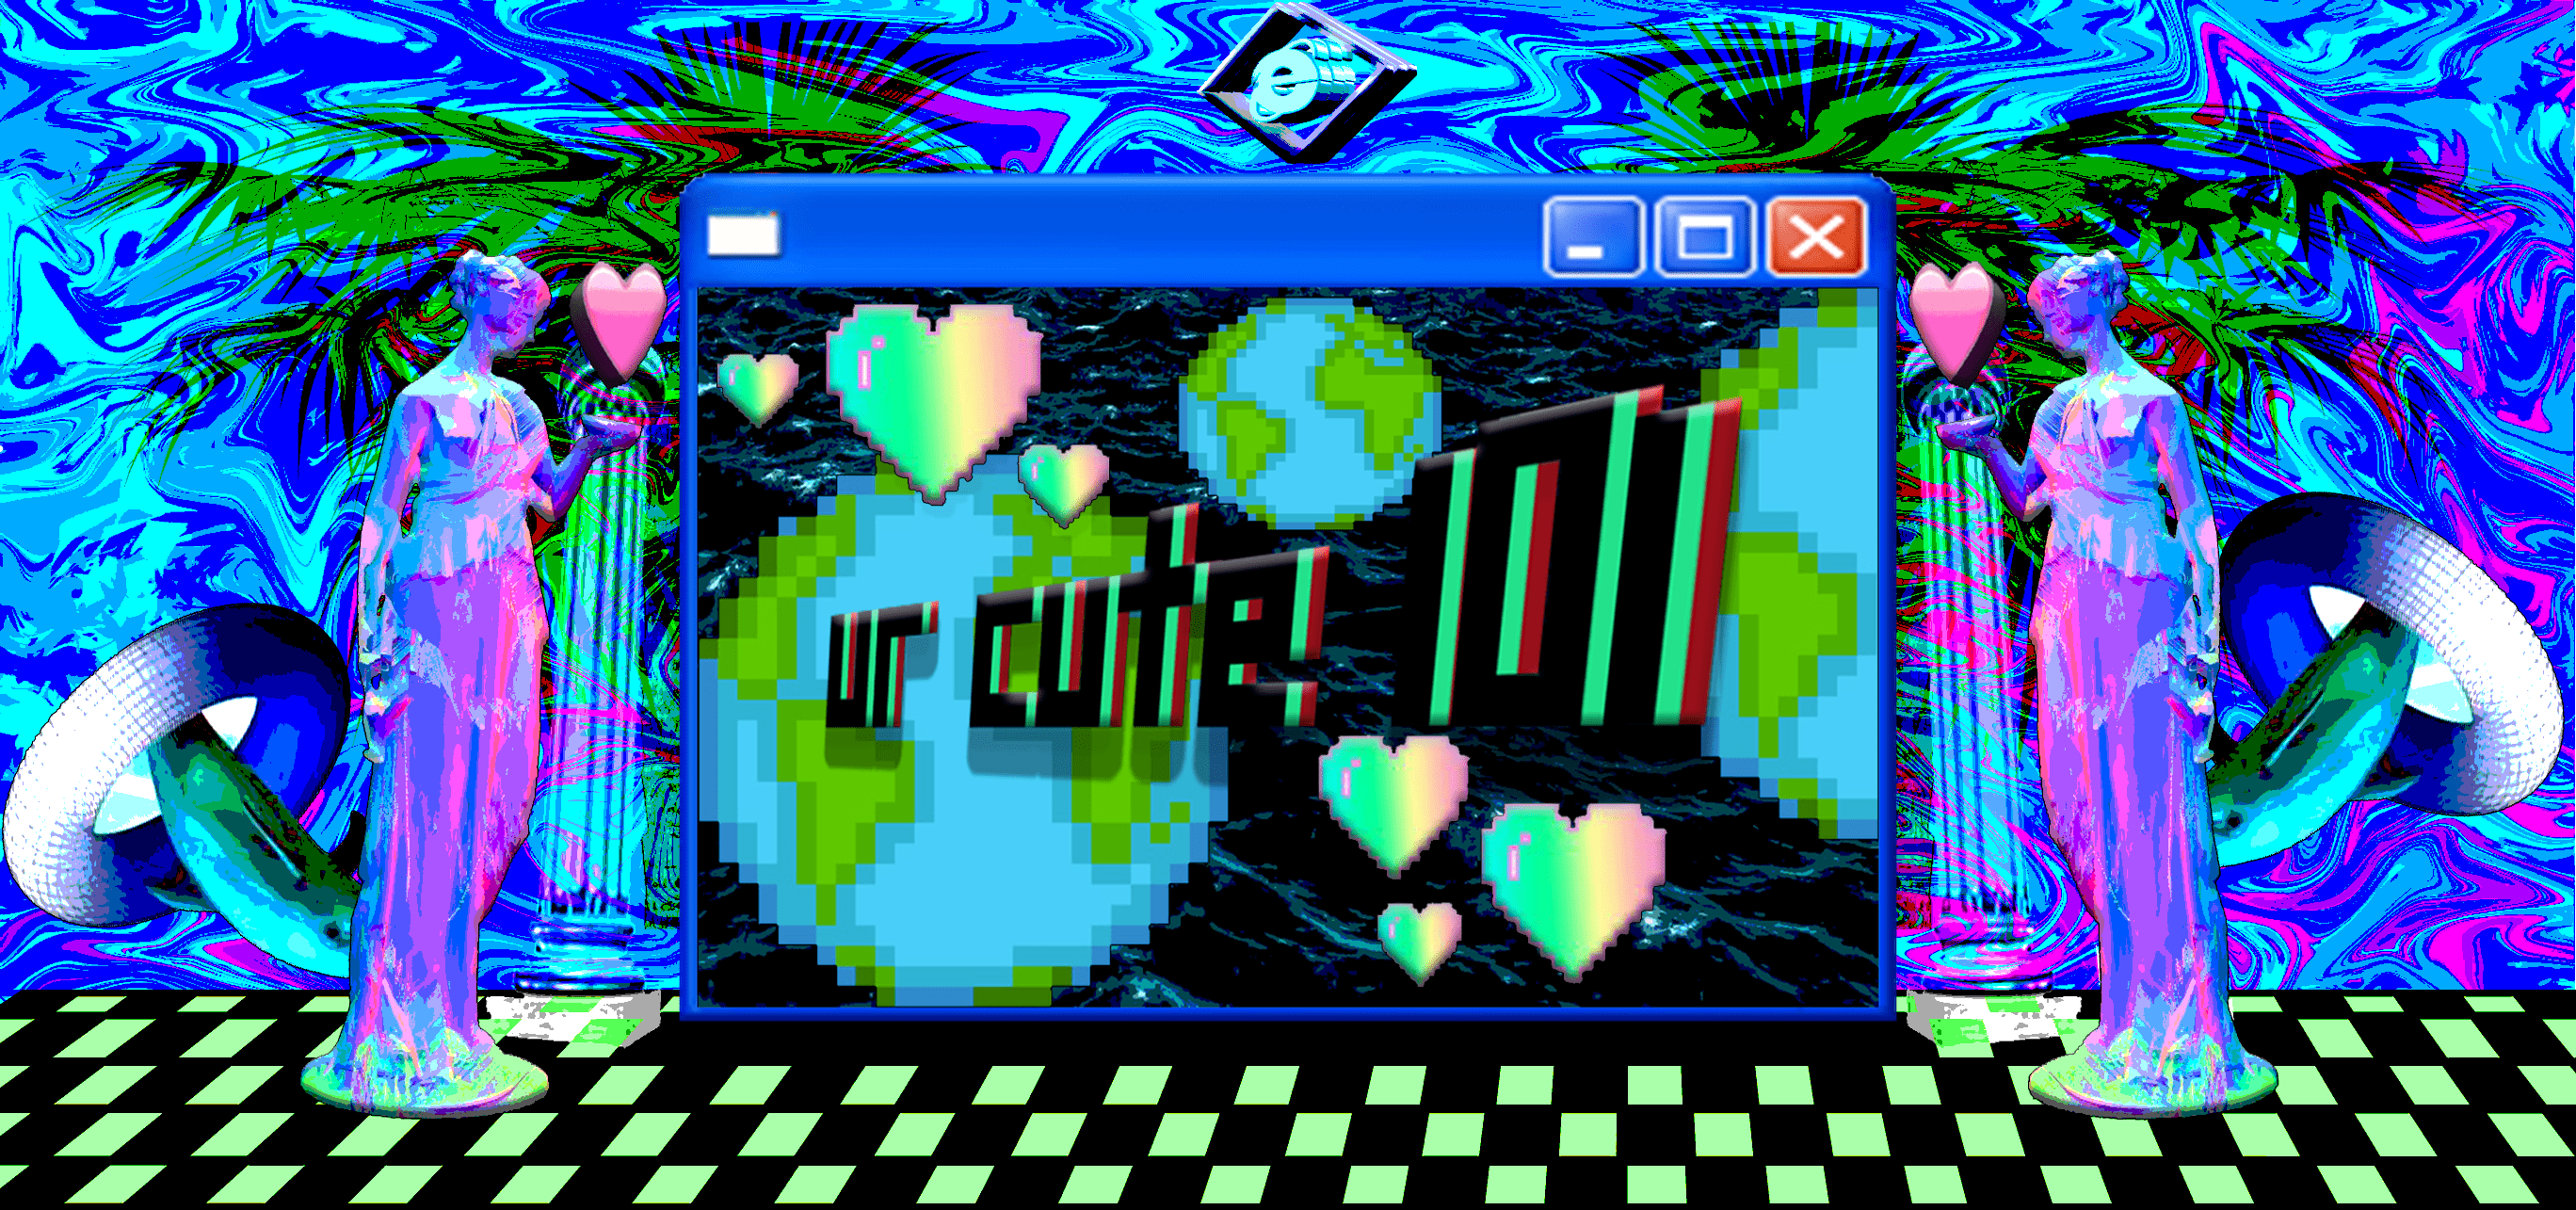 General 2736x1285 vaporwave retrowave Retro computers 3D Abstract Earth Internet Explorer trees colorful